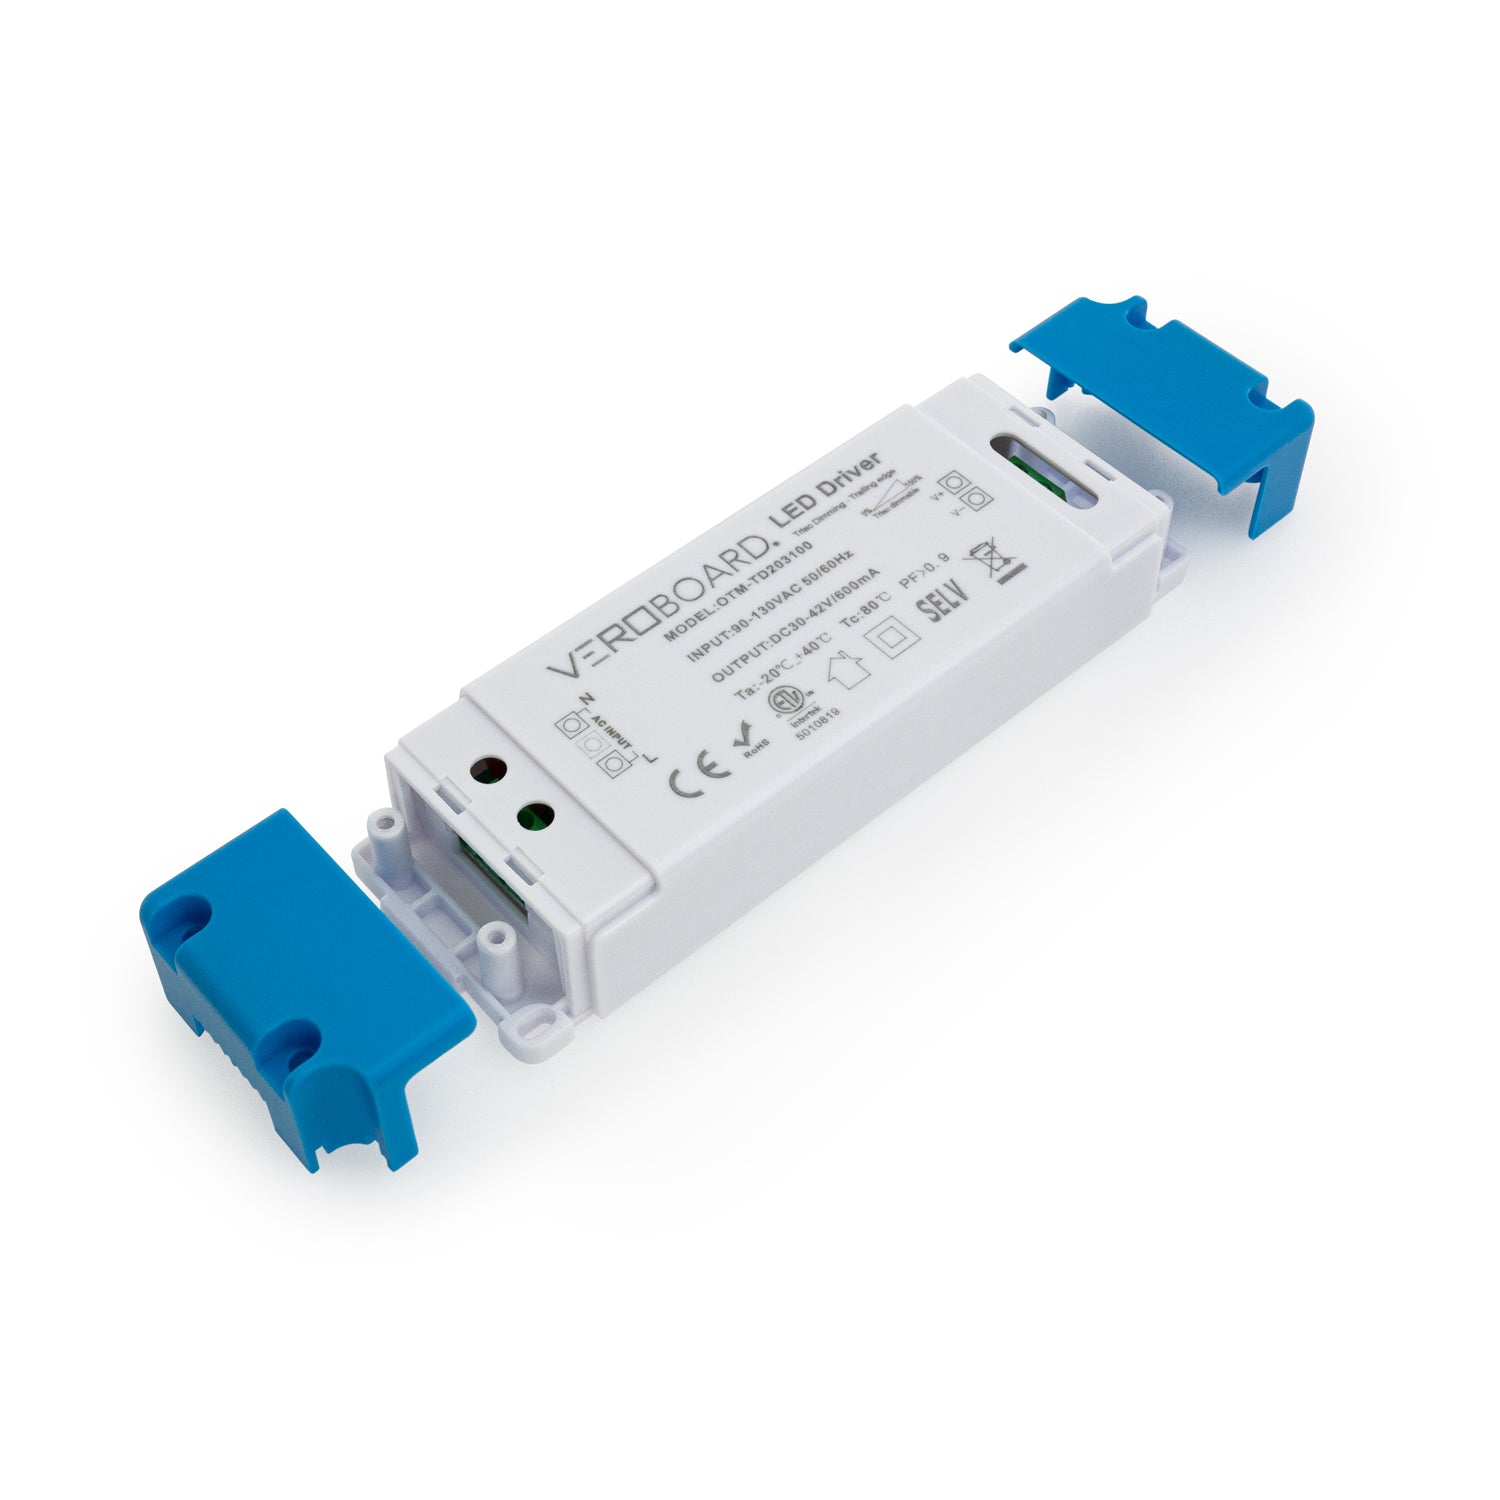 Constant Current 600ma 30-42V 25W Dimmable OTM-TD203100-600-25, Veroboard